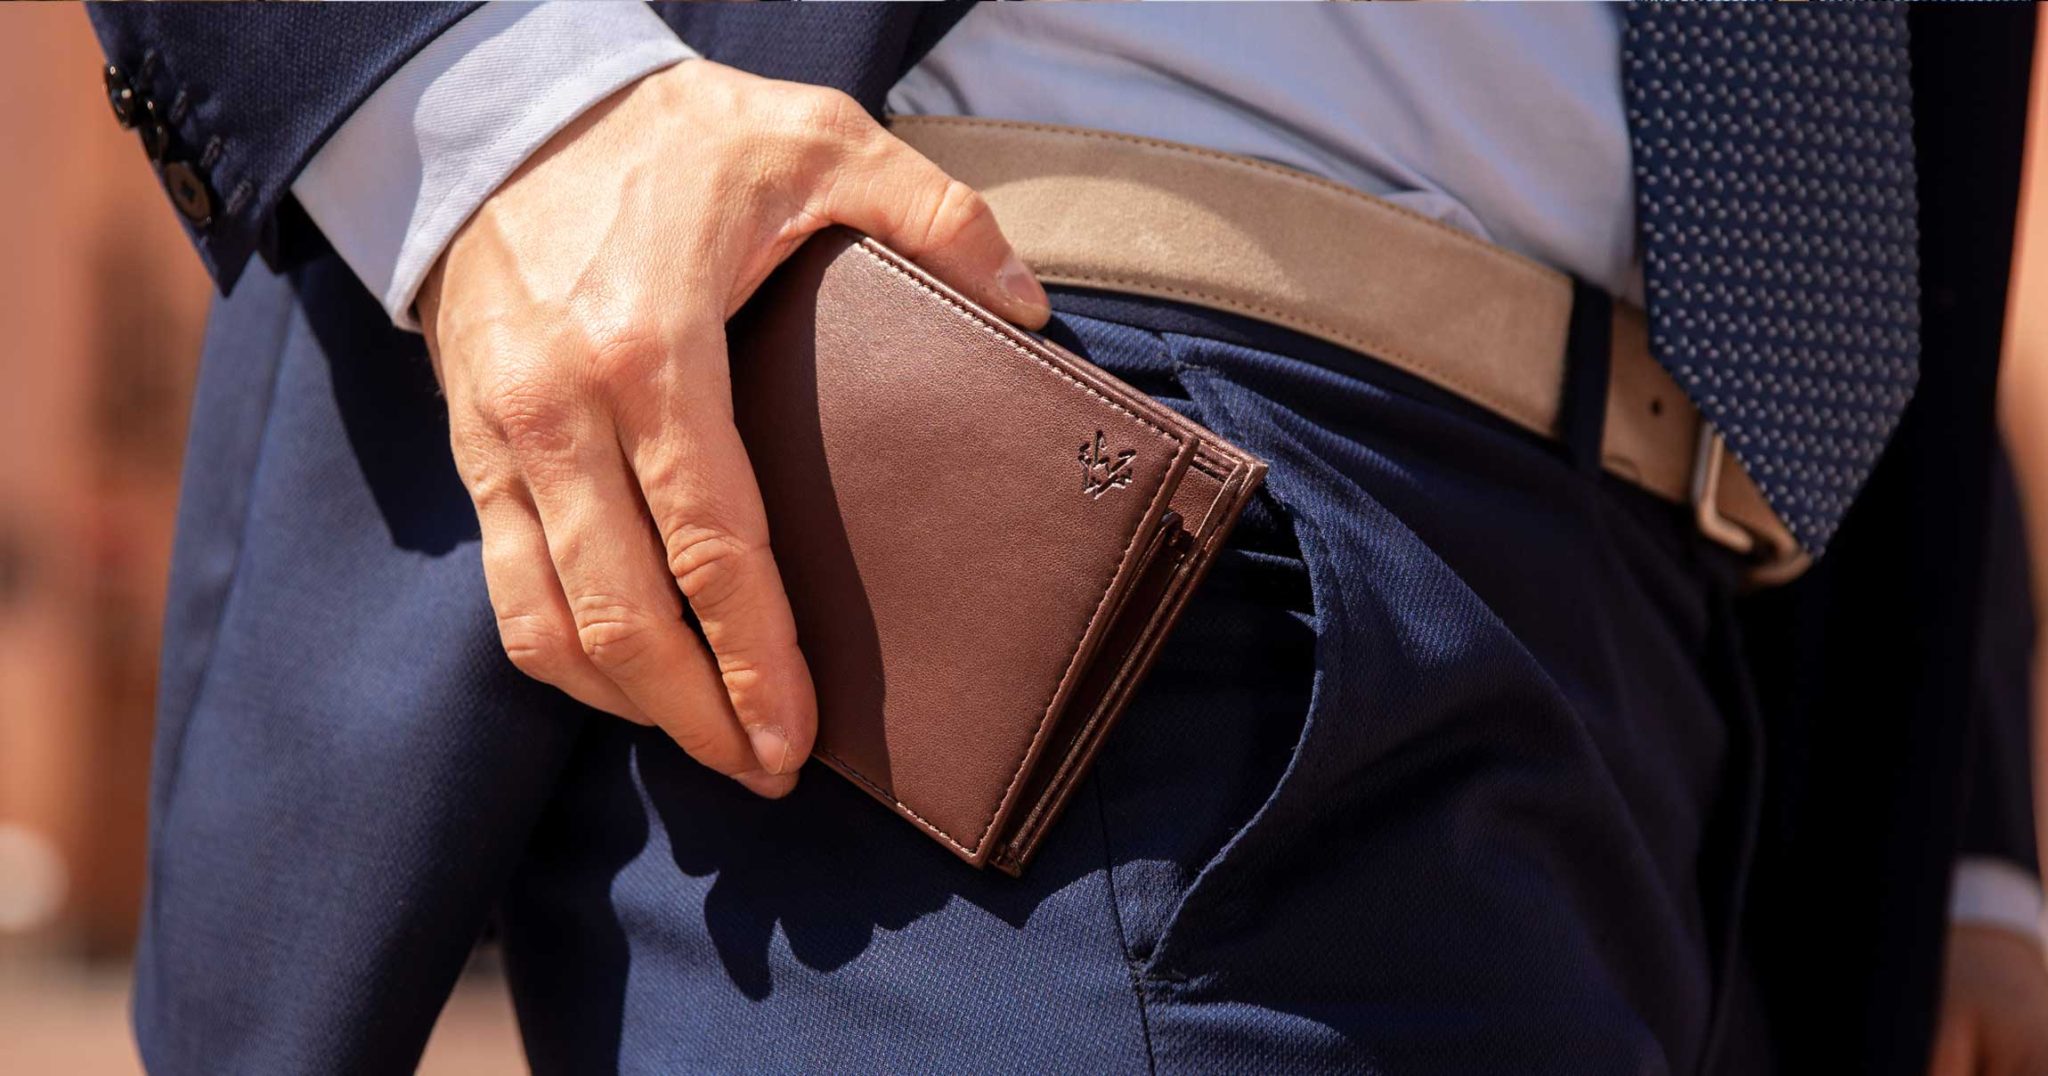 What pocket does a man's wallet go in?